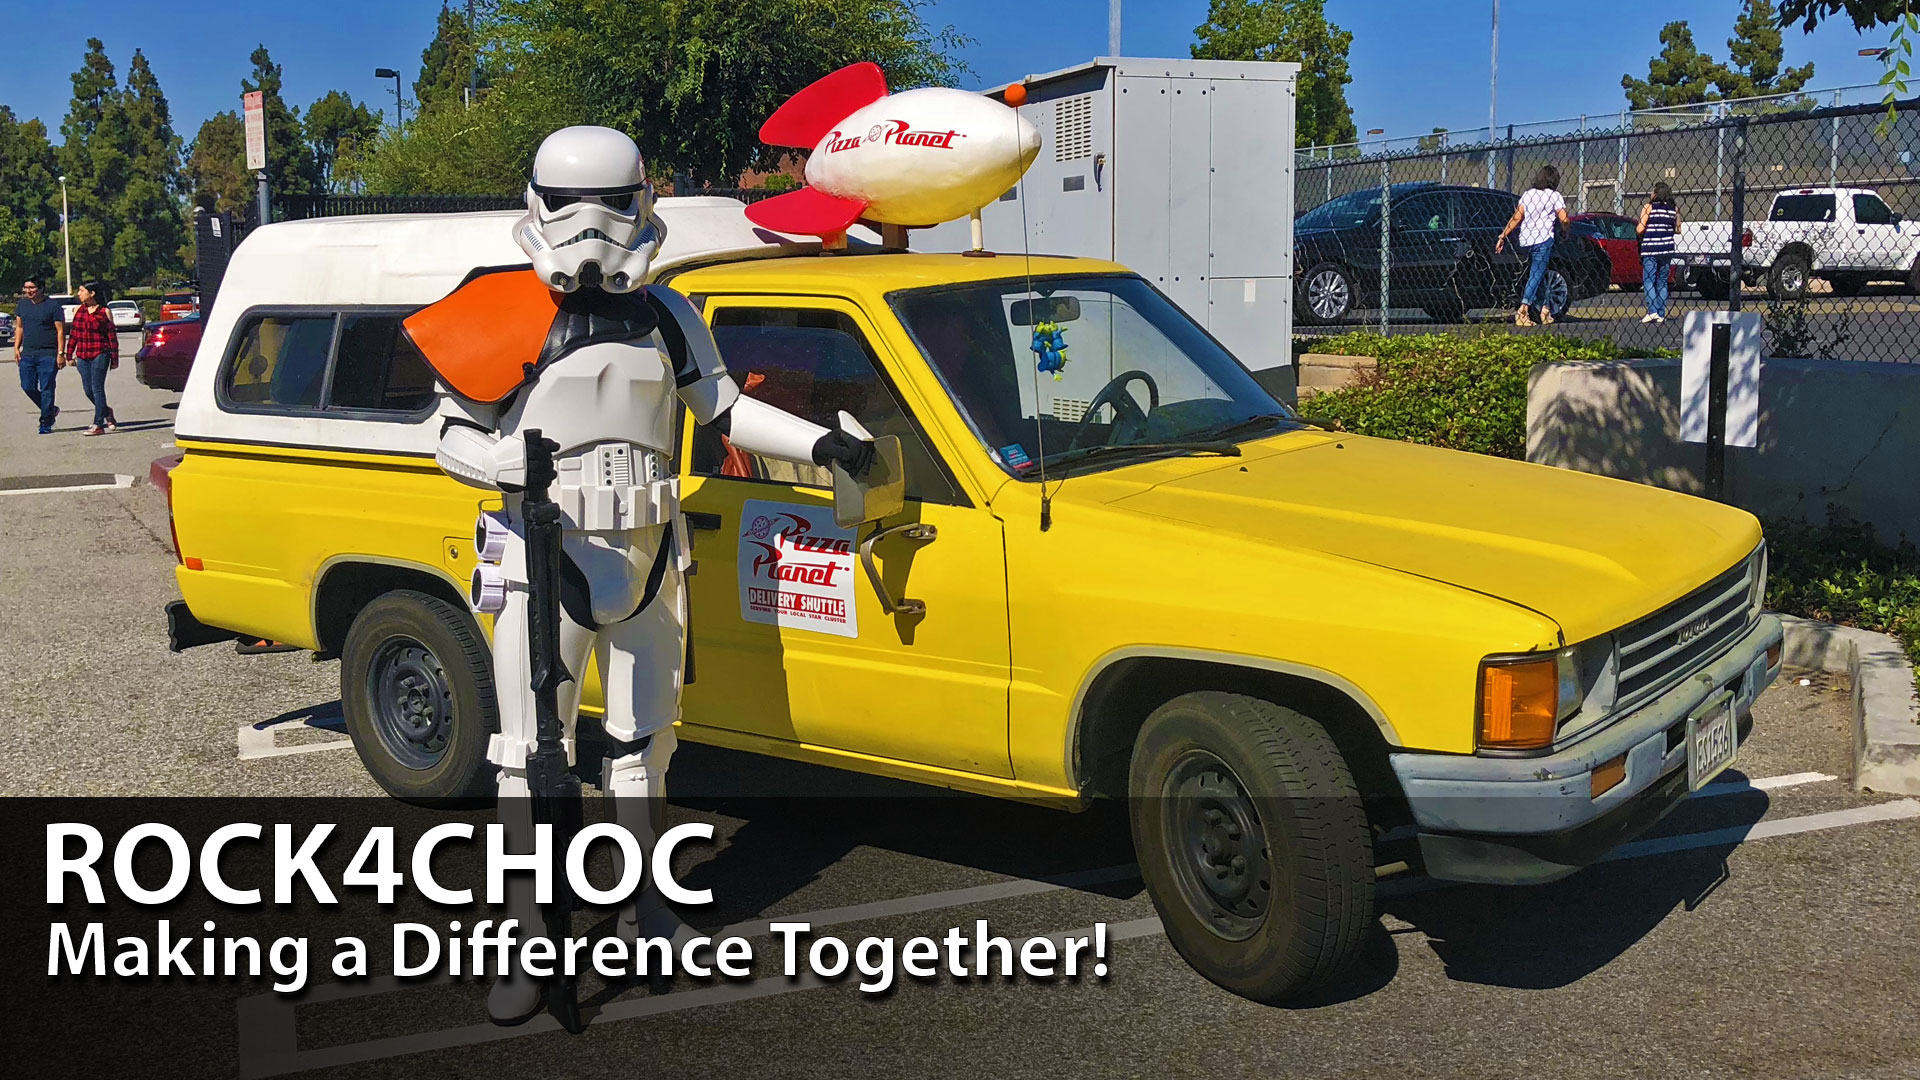 2018 ROCK4CHOC Continues to Raise Support for Children’s Hospital of Orange County Ahead of CHOC Walk in the Park!